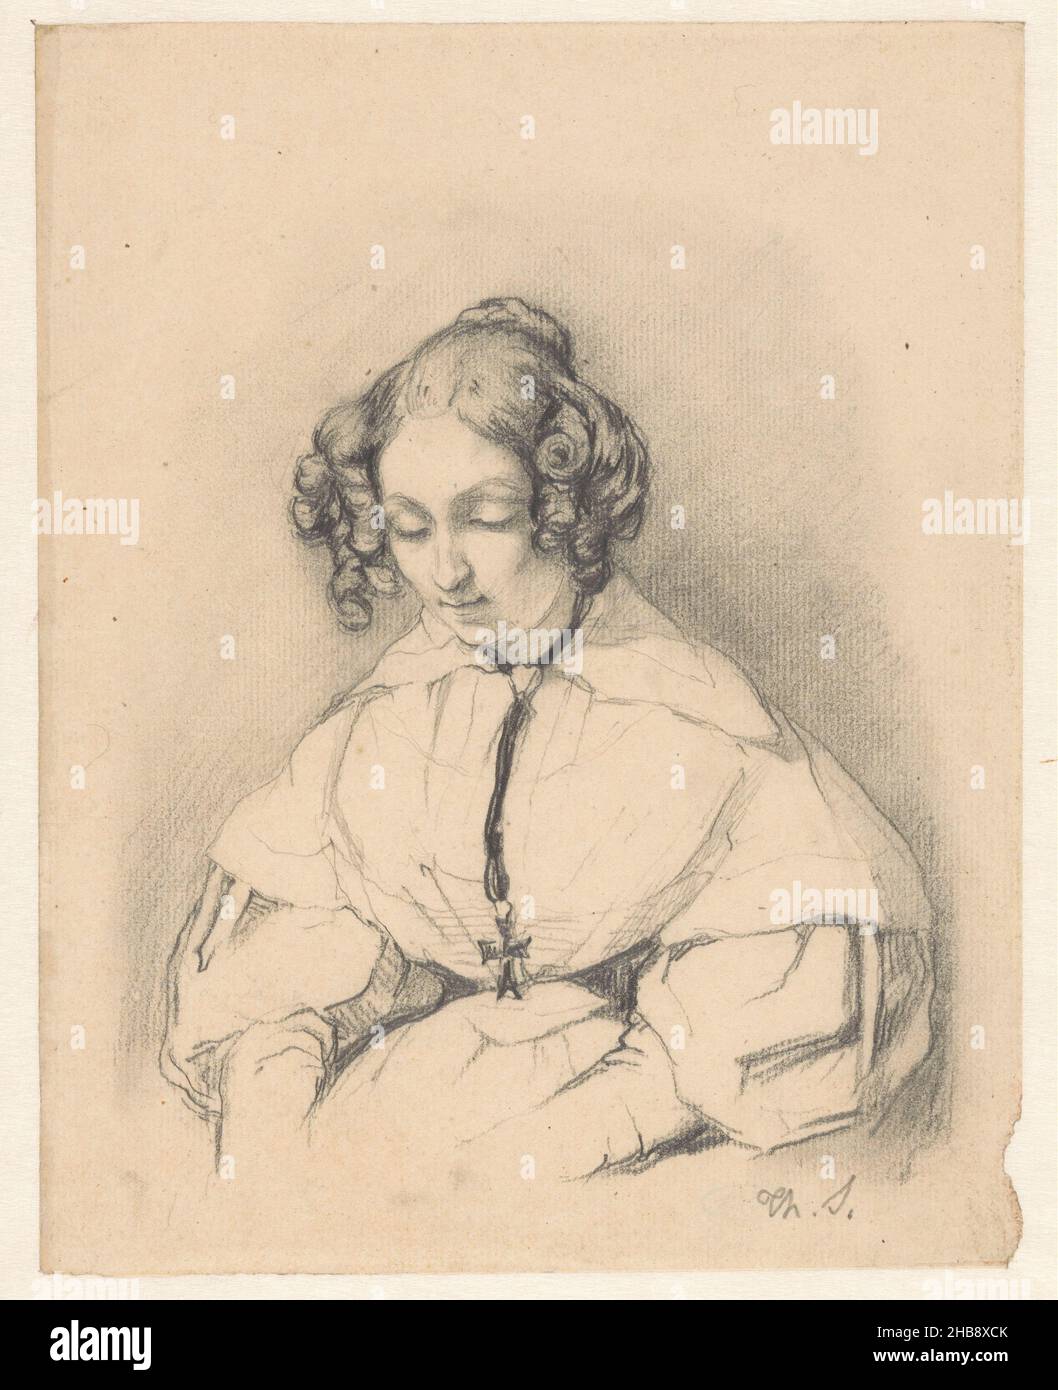 Portrait of a seated woman with eyes lowered, draughtsman: Theodoor Schaepkens, 1820 - 1883, paper, pencil, height 213 mm × width 169 mm Stock Photo